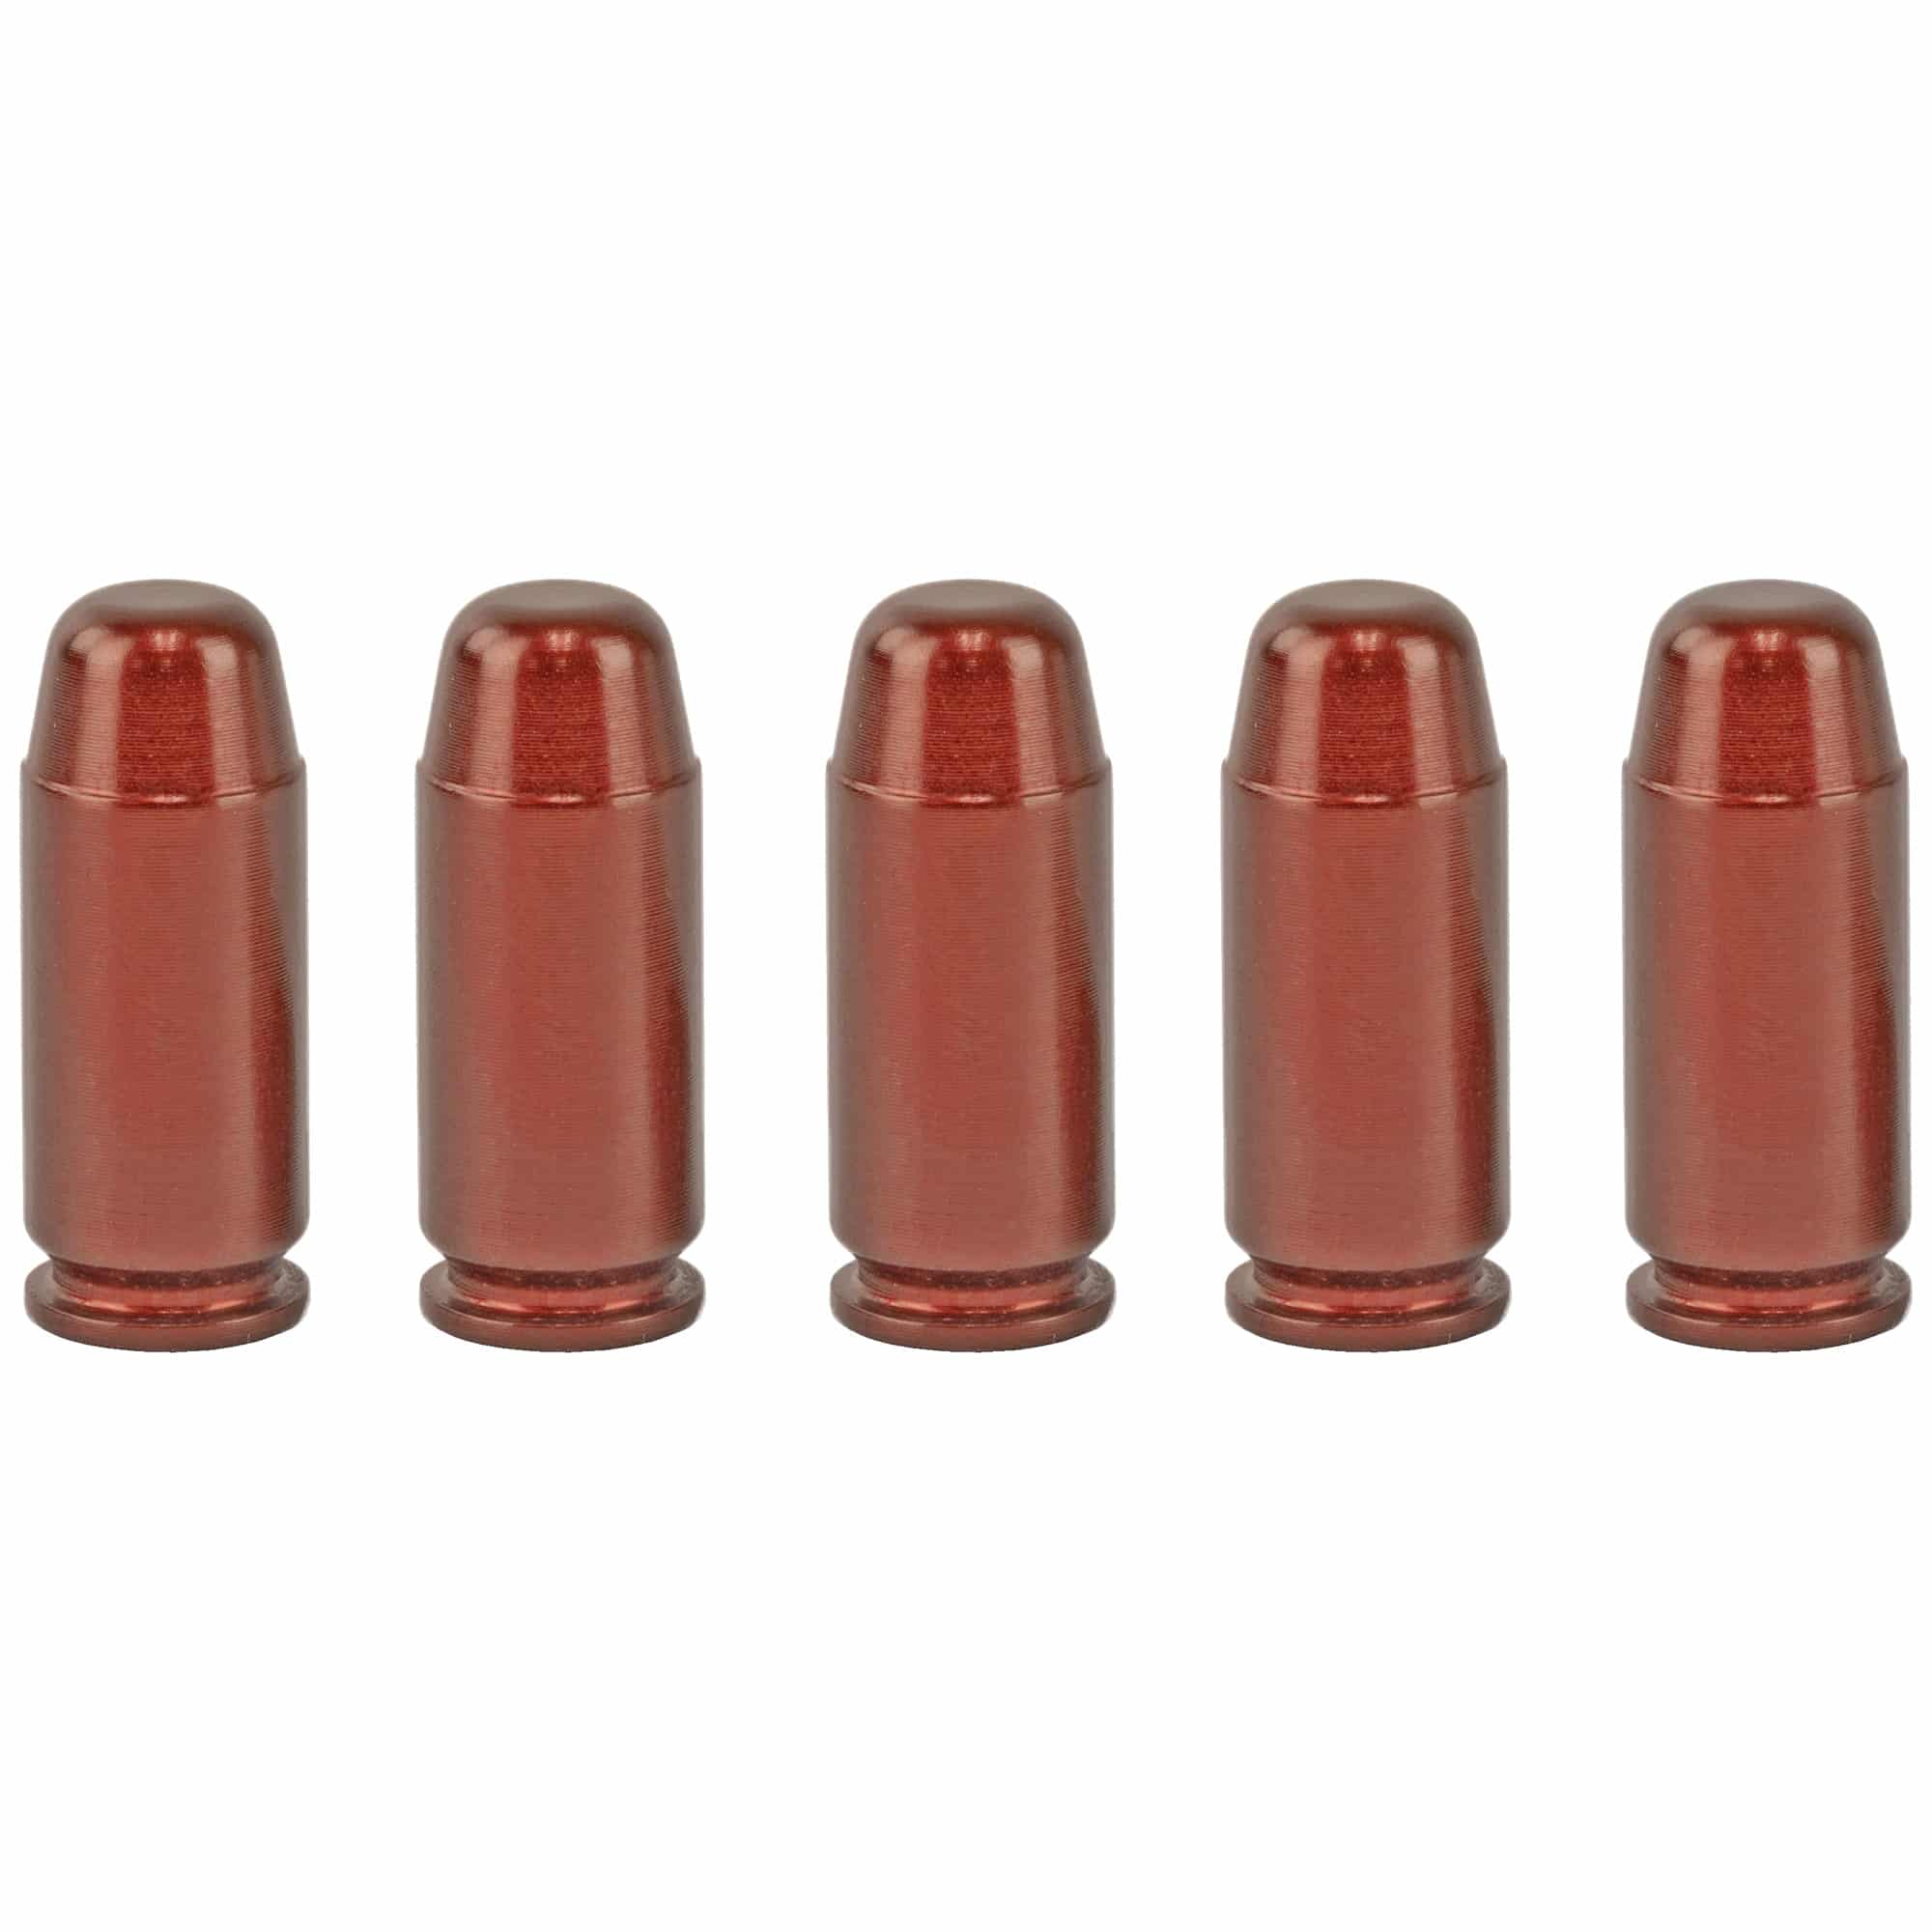 A-Zoom Precision Metal Snap Caps for 45 ACP # 15115  5 per Package  New! 